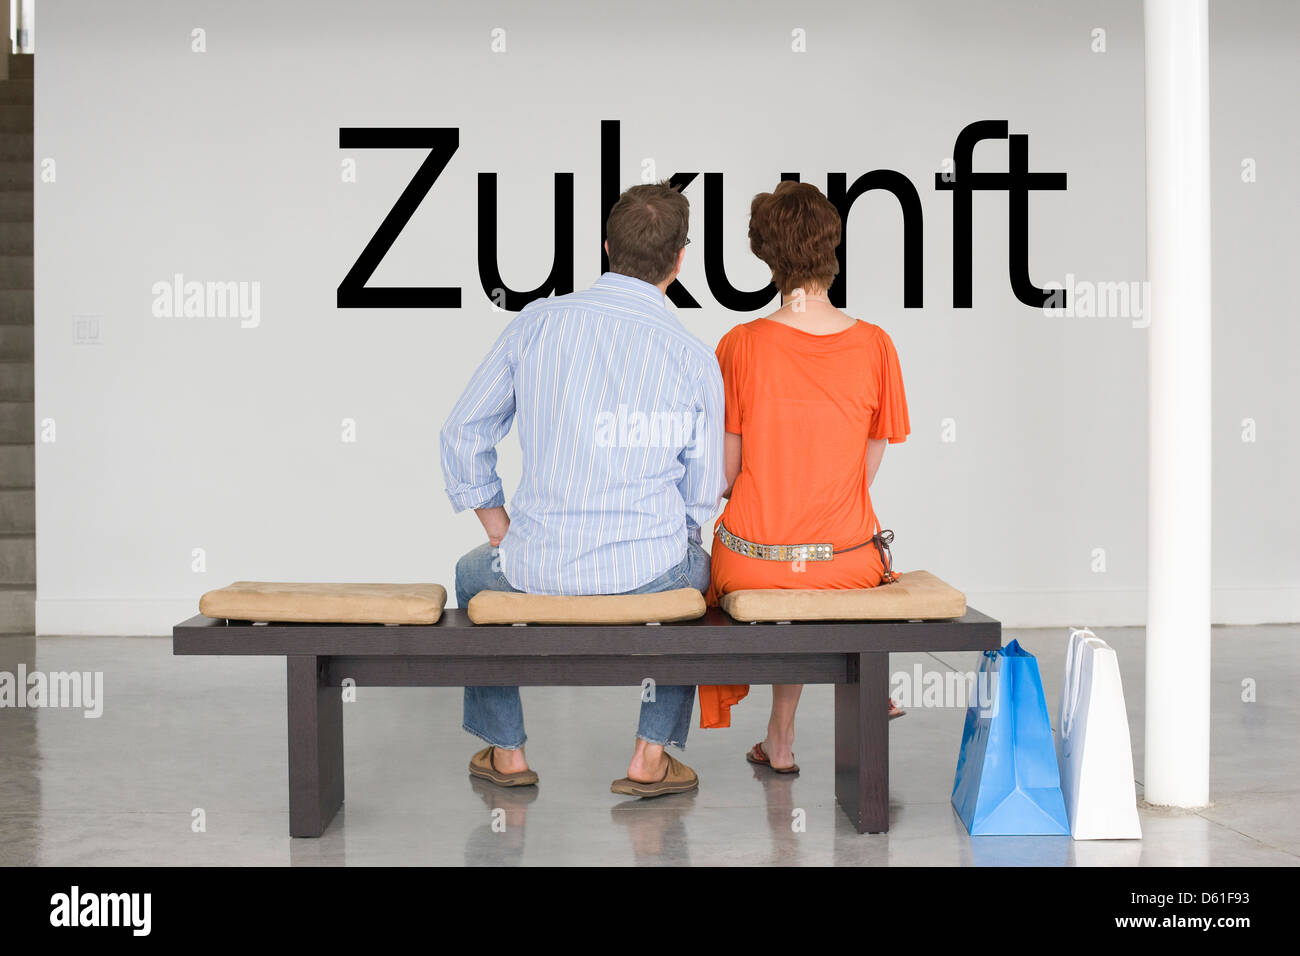 Rear view of couple seated bench reading German text 'Zukunft' (future) wall Stock Photo